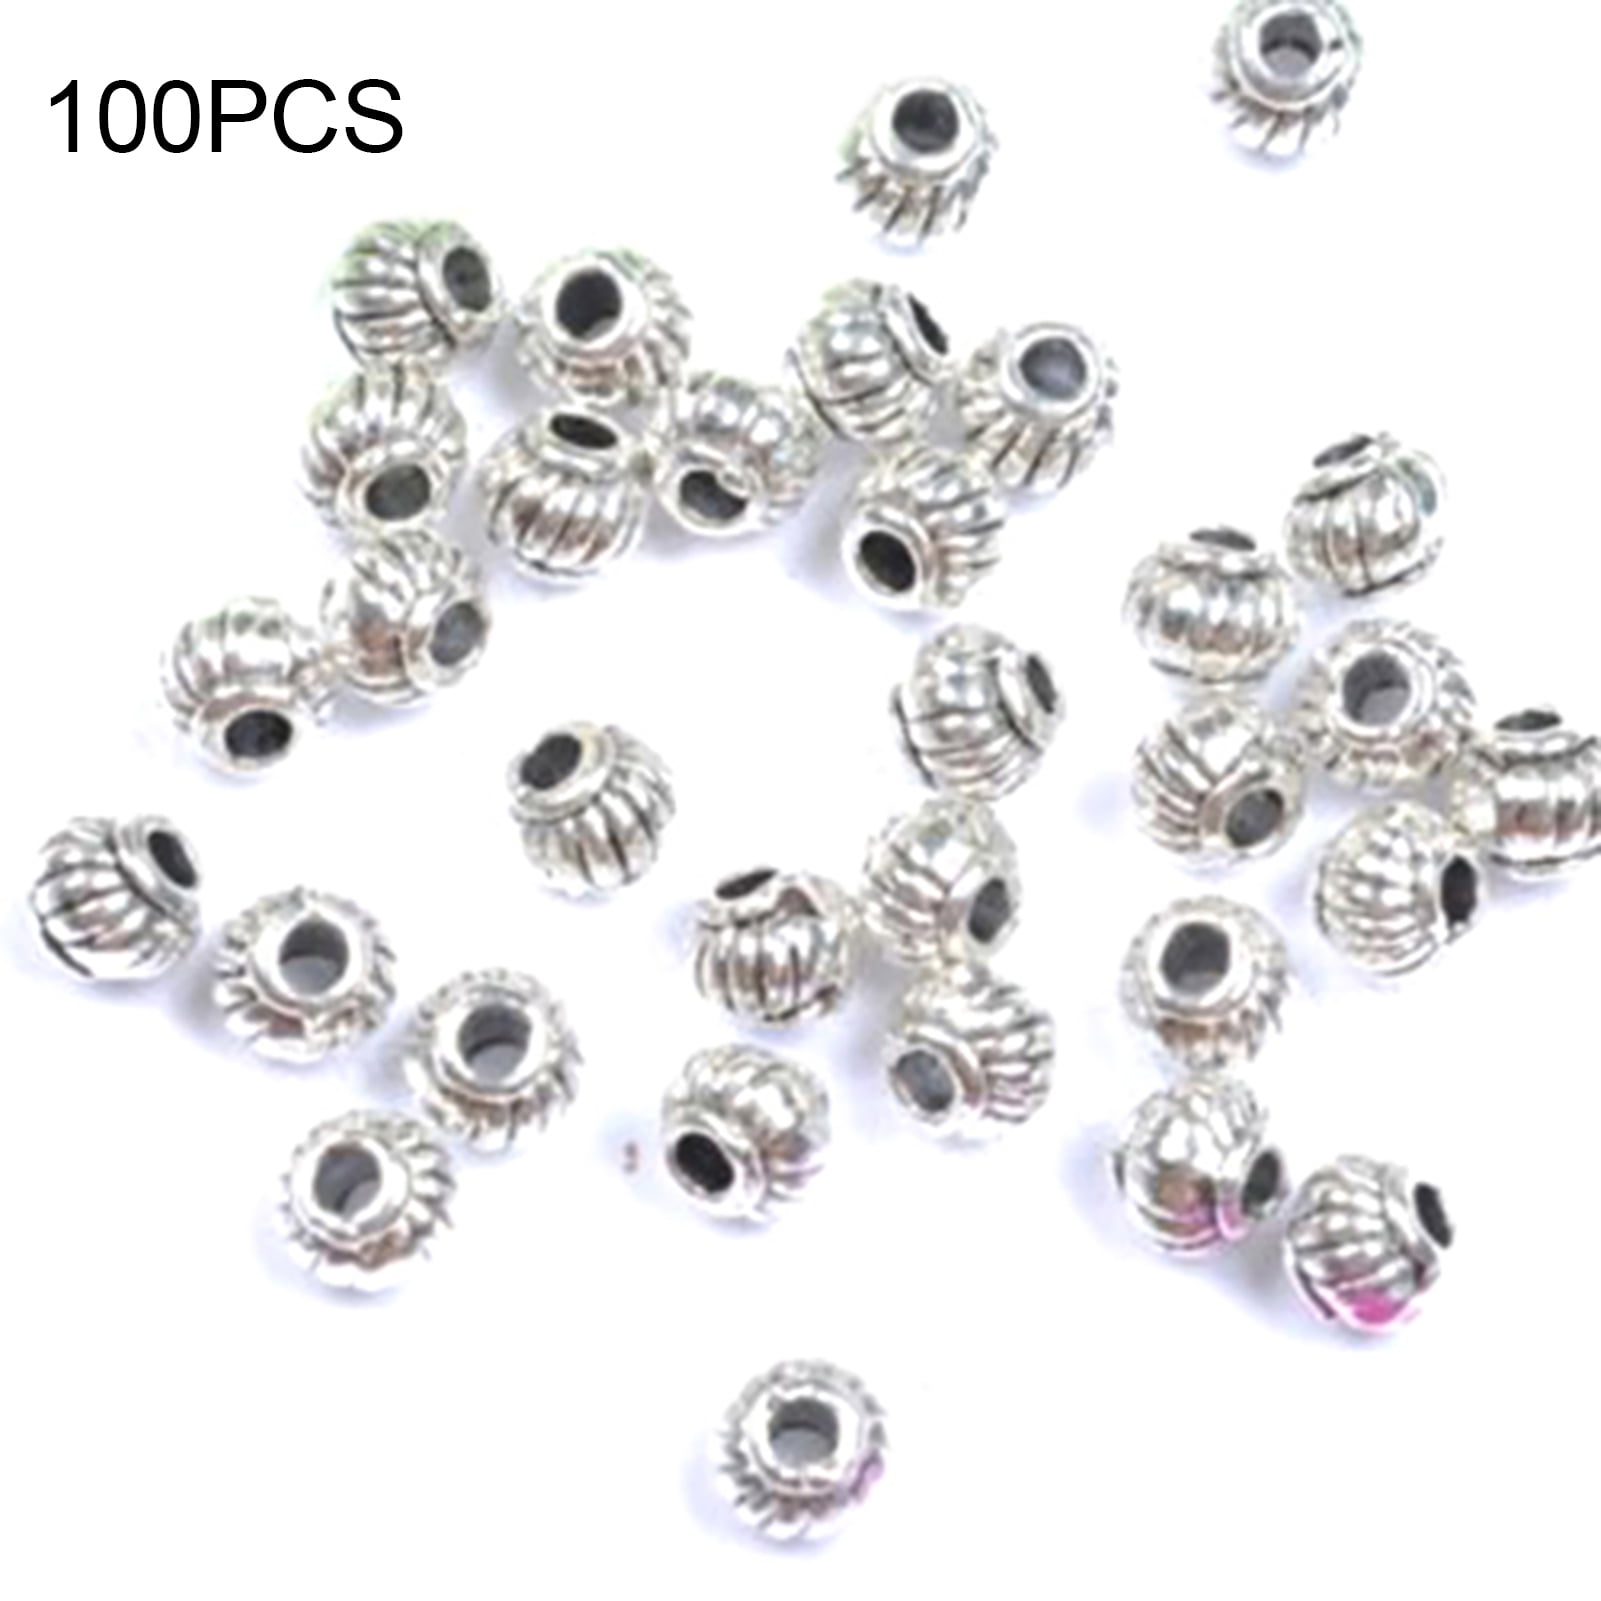 10-100PCS Jewelry Earring Making Findings 925 Silver Plated Pendant Bead Caps 